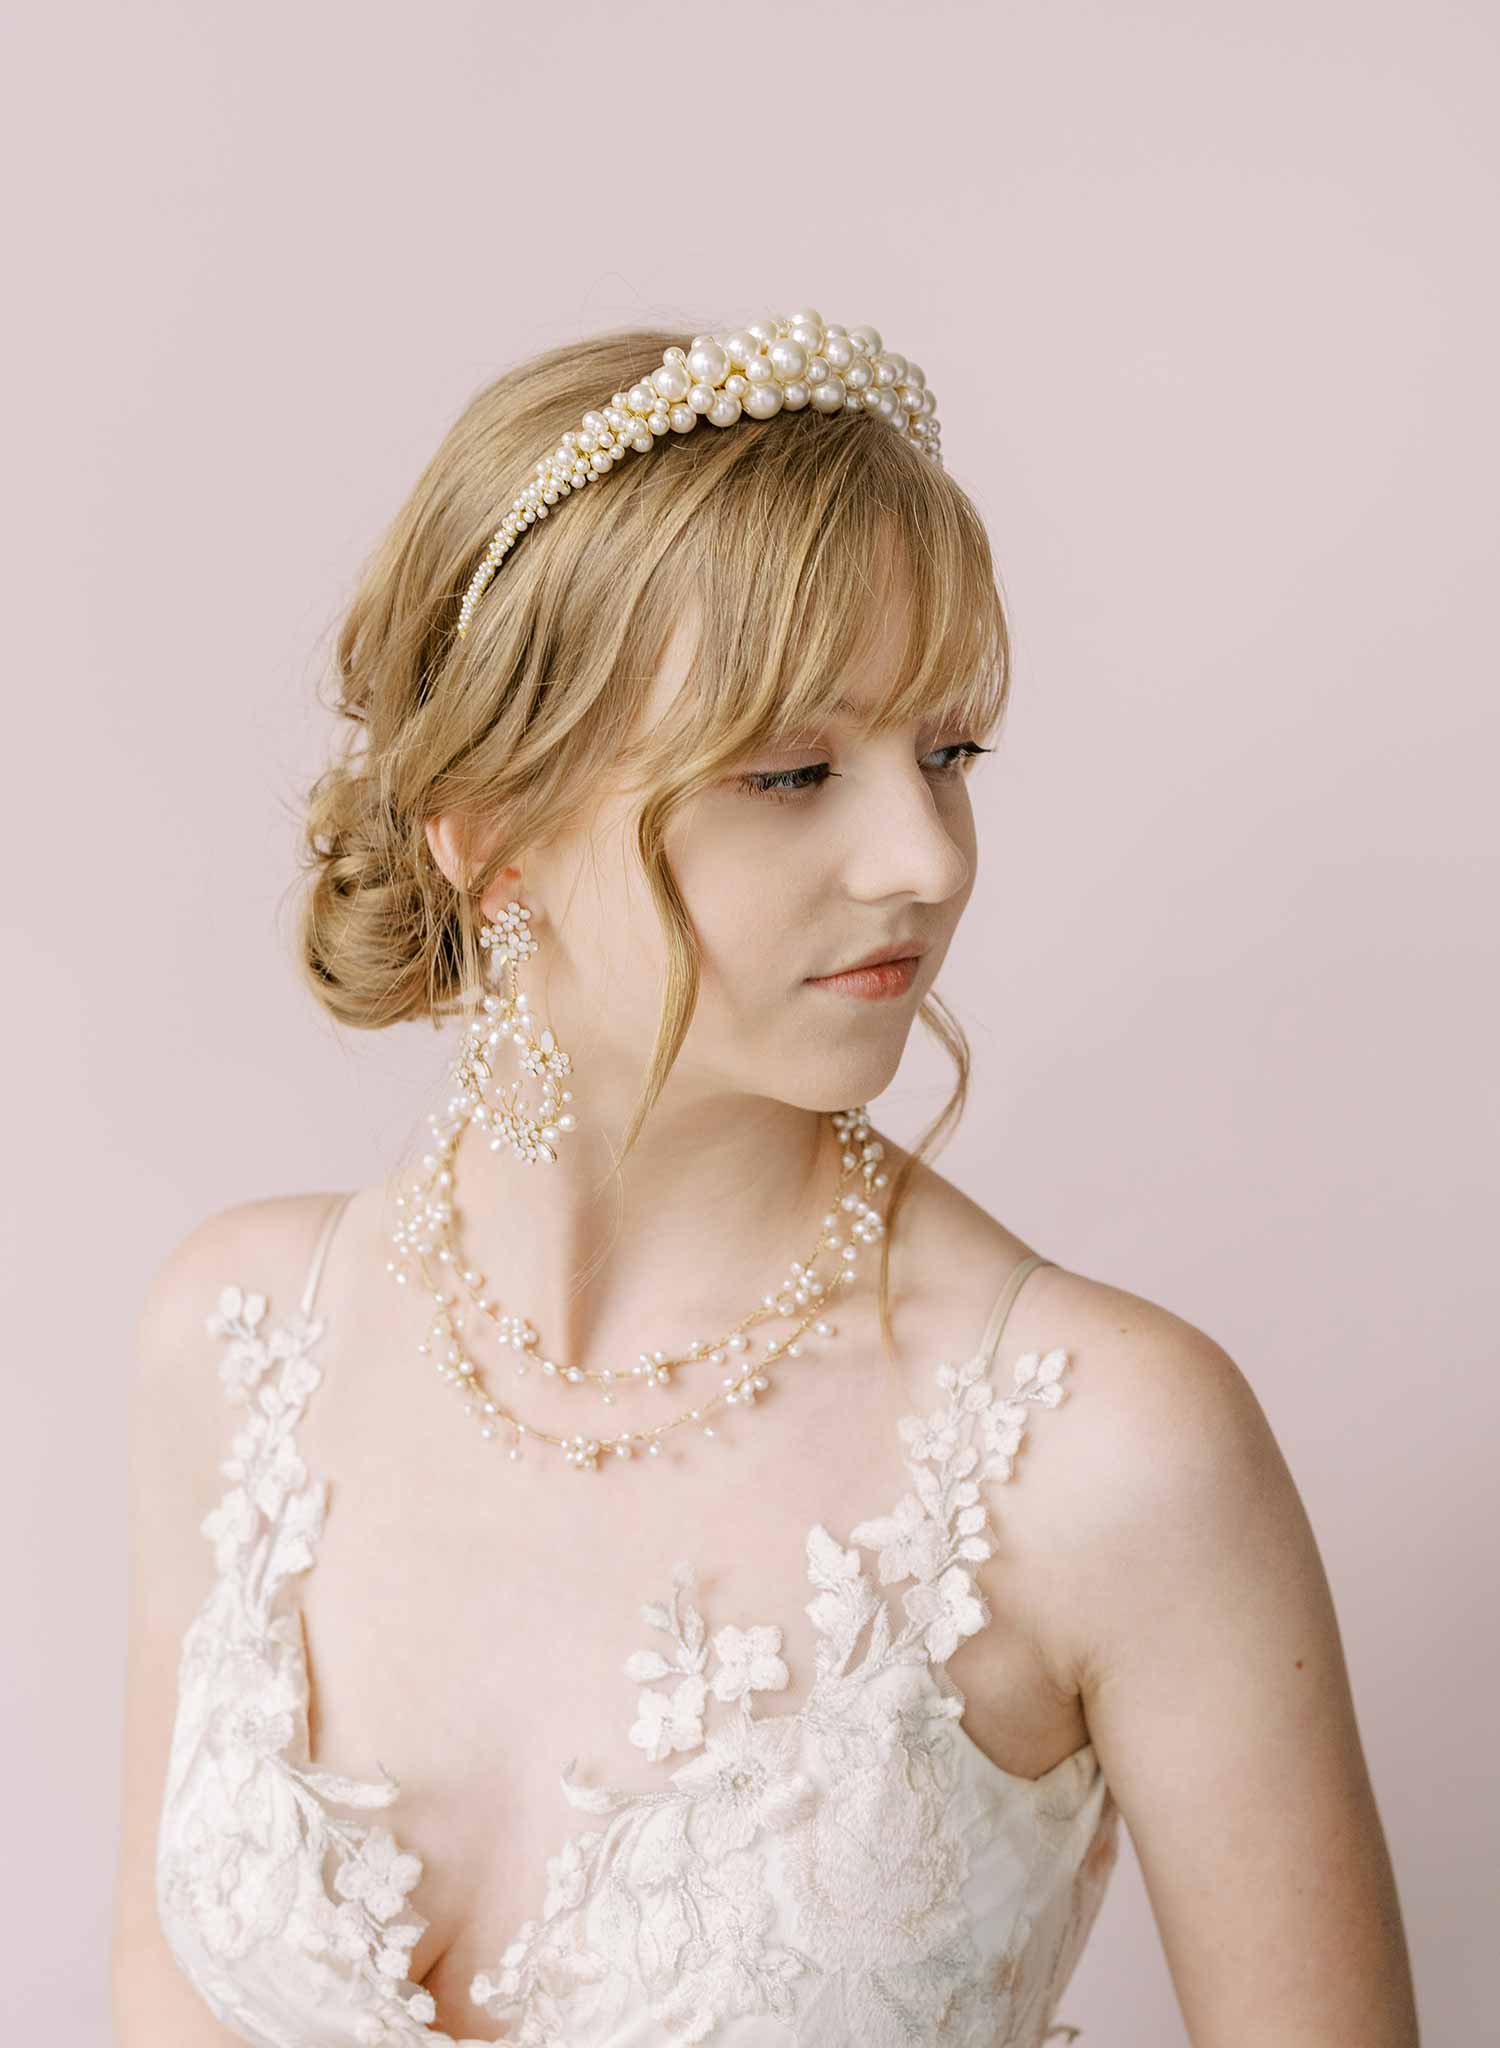 Where to get hair pearls for eras last minute｜TikTok Search